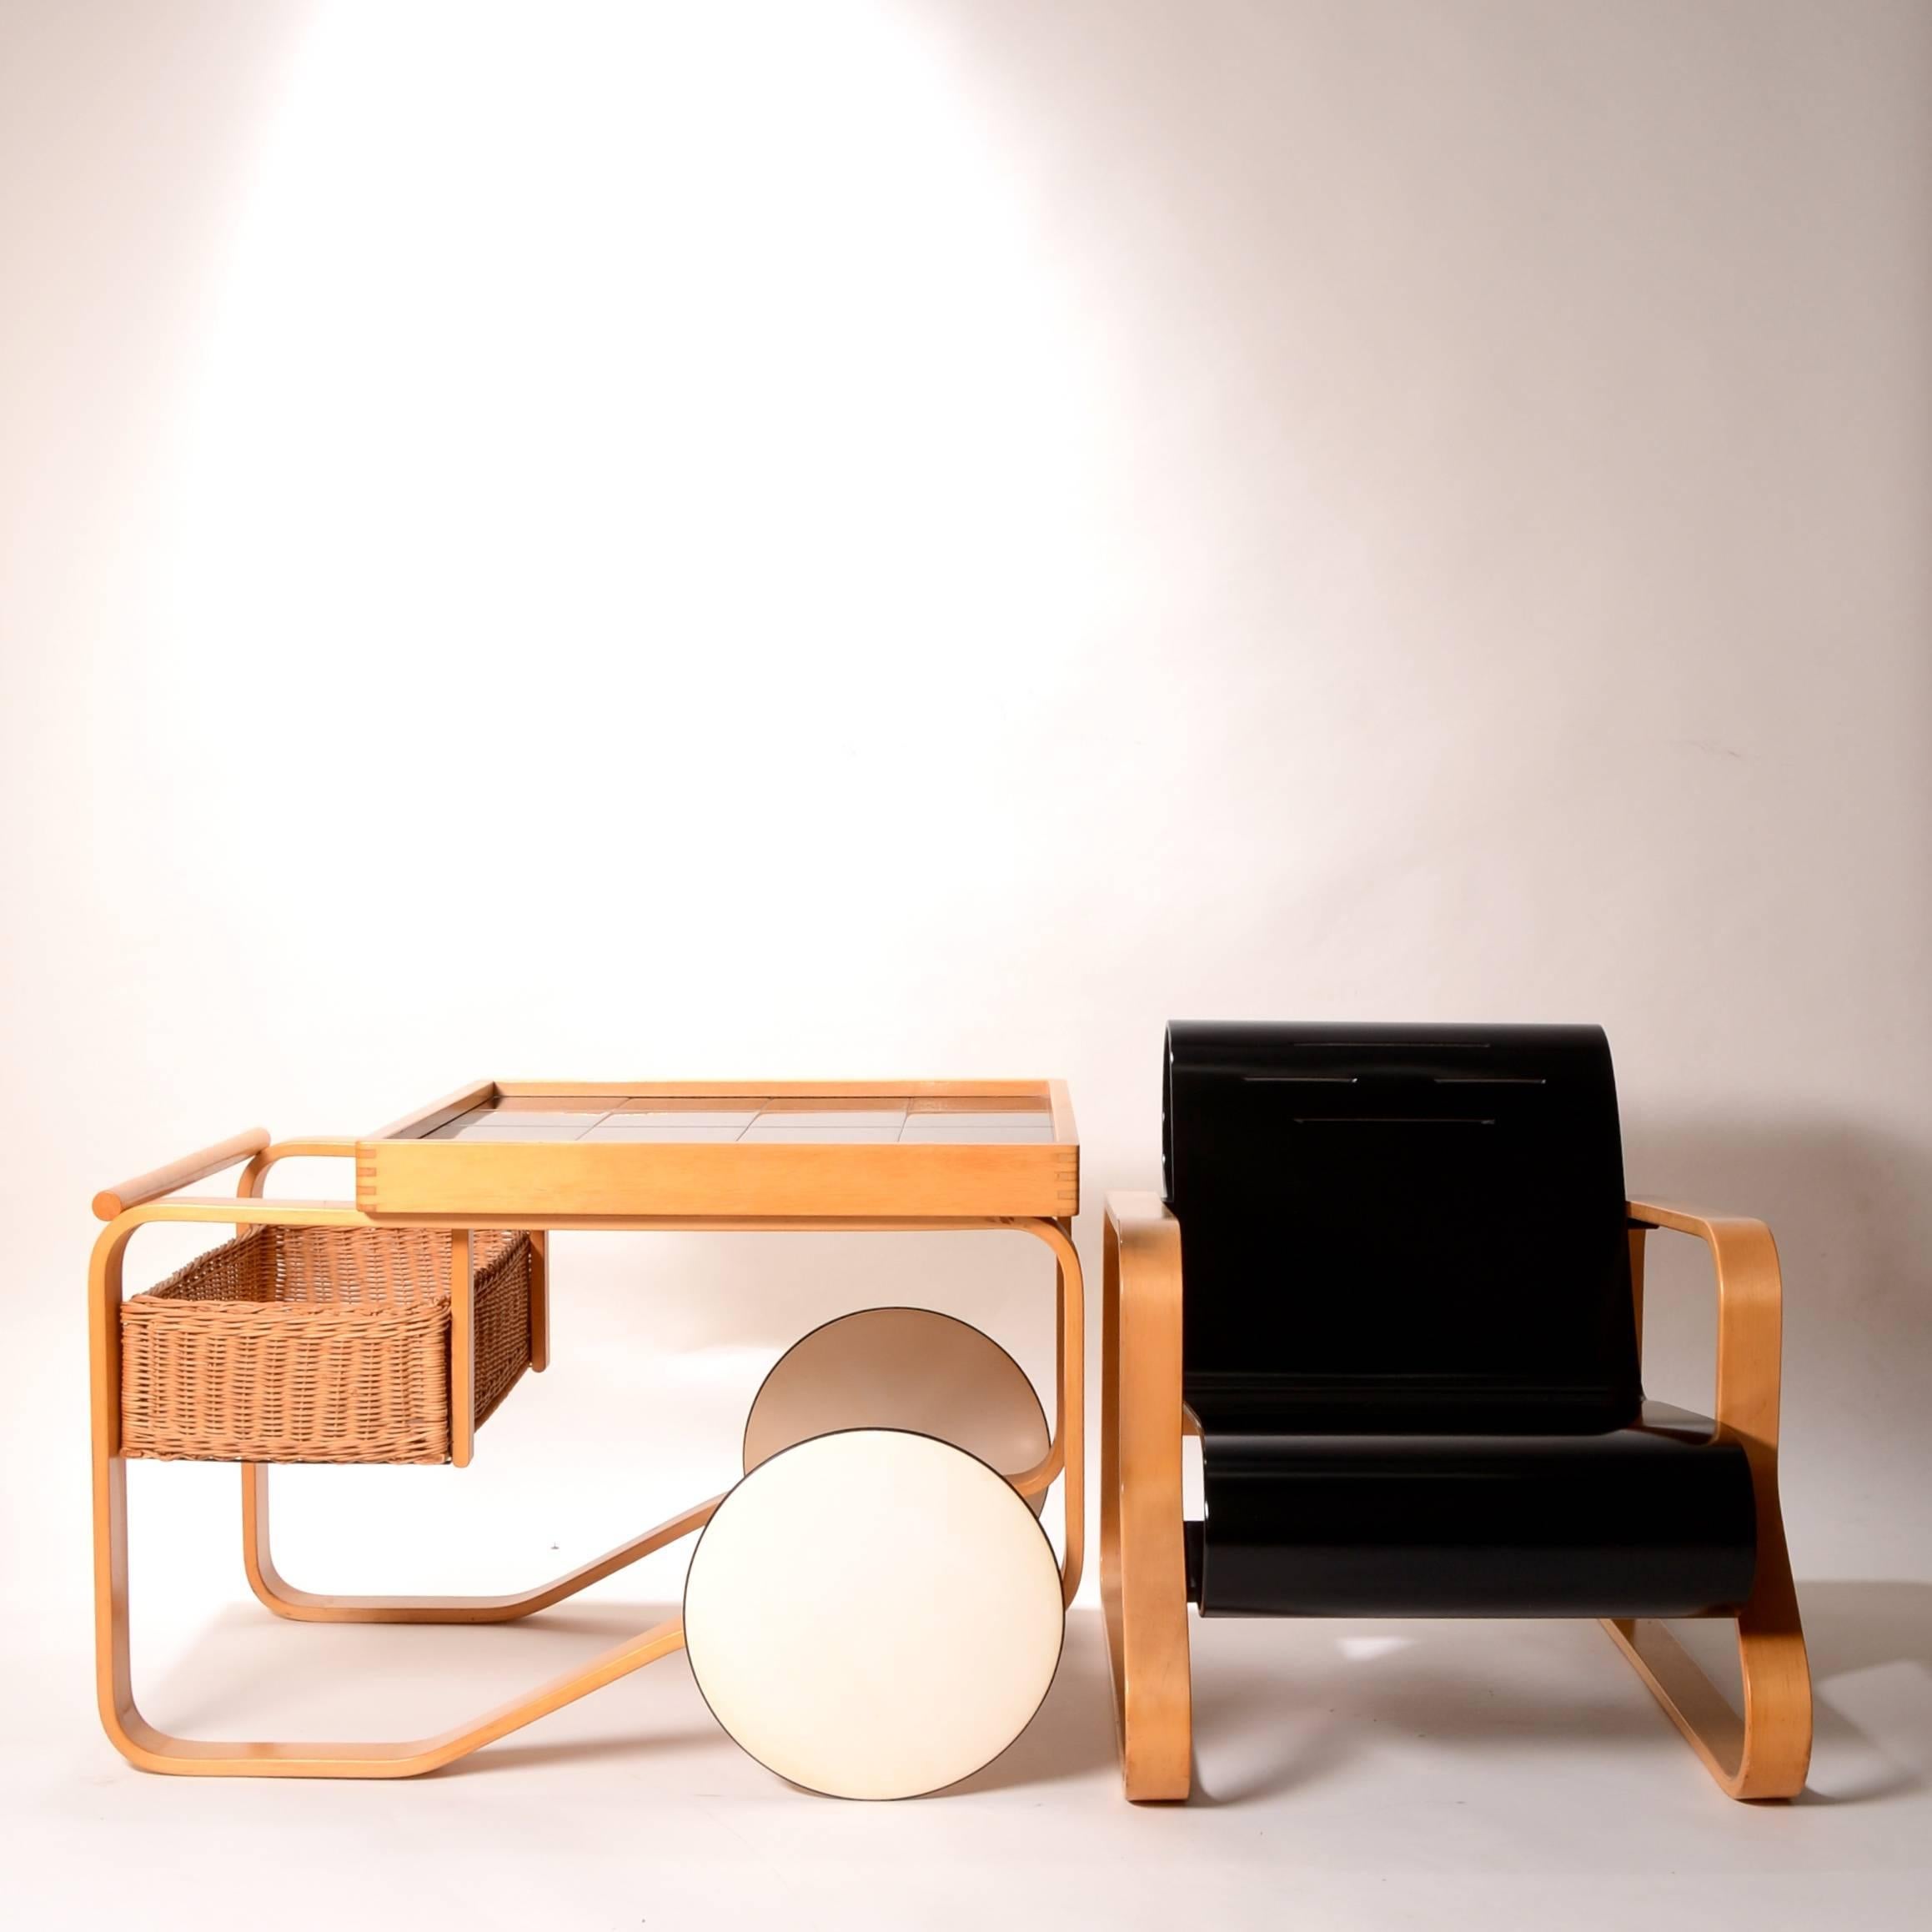 This is a rare tea trolley model 900 and bentwood chair model 44 Designed by Alvar Aalto for Artek, Finland, 1940s. Both are in excellent condition. From the estate of the great composer Gary Geld. The pieces are available separately.

Chair: 24